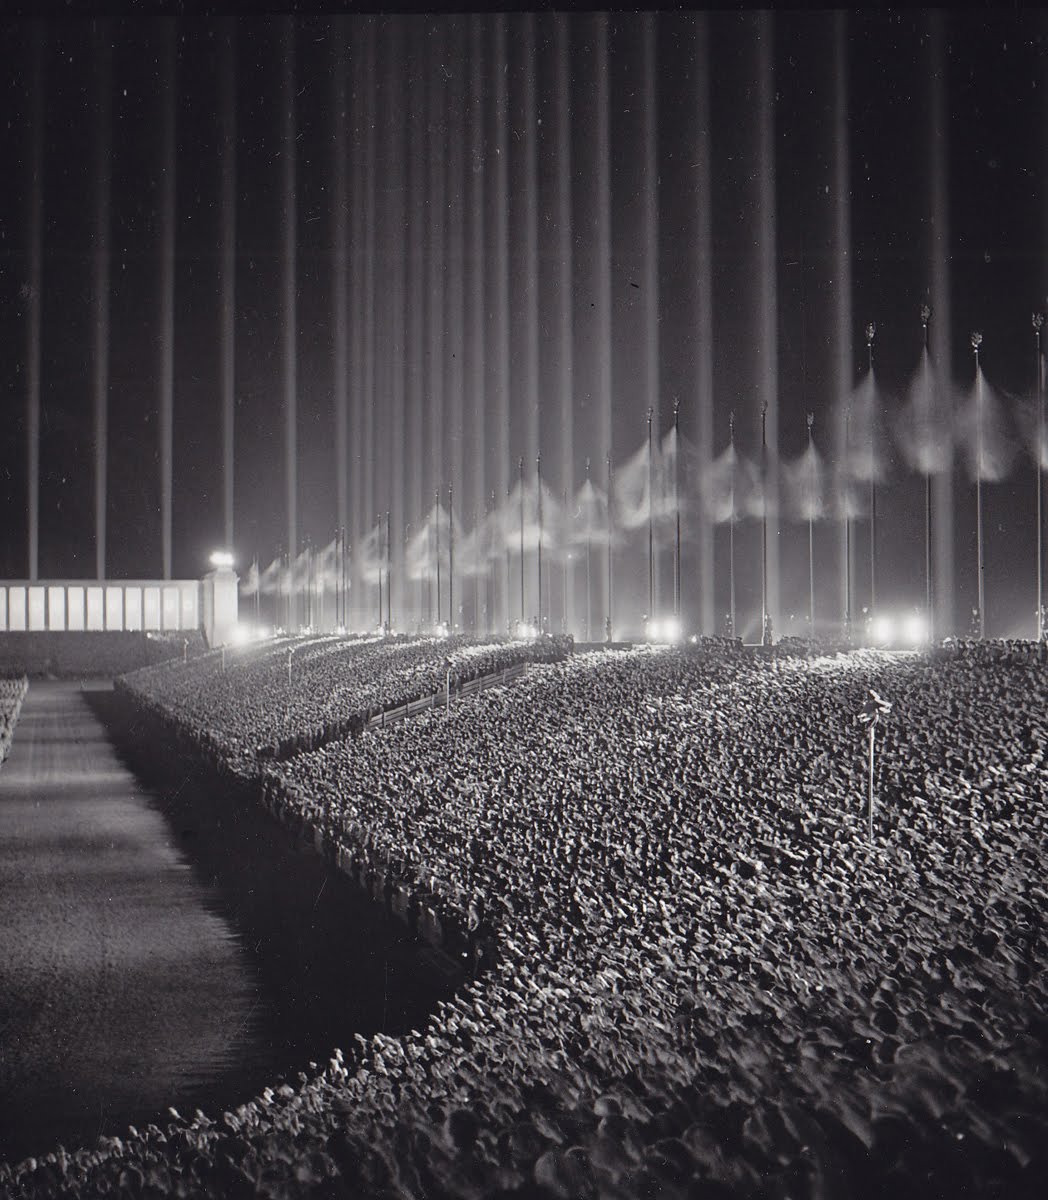 Nazi Rally being held at the “Cathedral of Light” in Nuremberg. Designed by Albert Speer, the “cathedral” actually consisted of 152 anti-aircraft searchlights, at intervals of 12 metres, aimed skyward to create a series of vertical bars surrounding the audience. 1930’s.